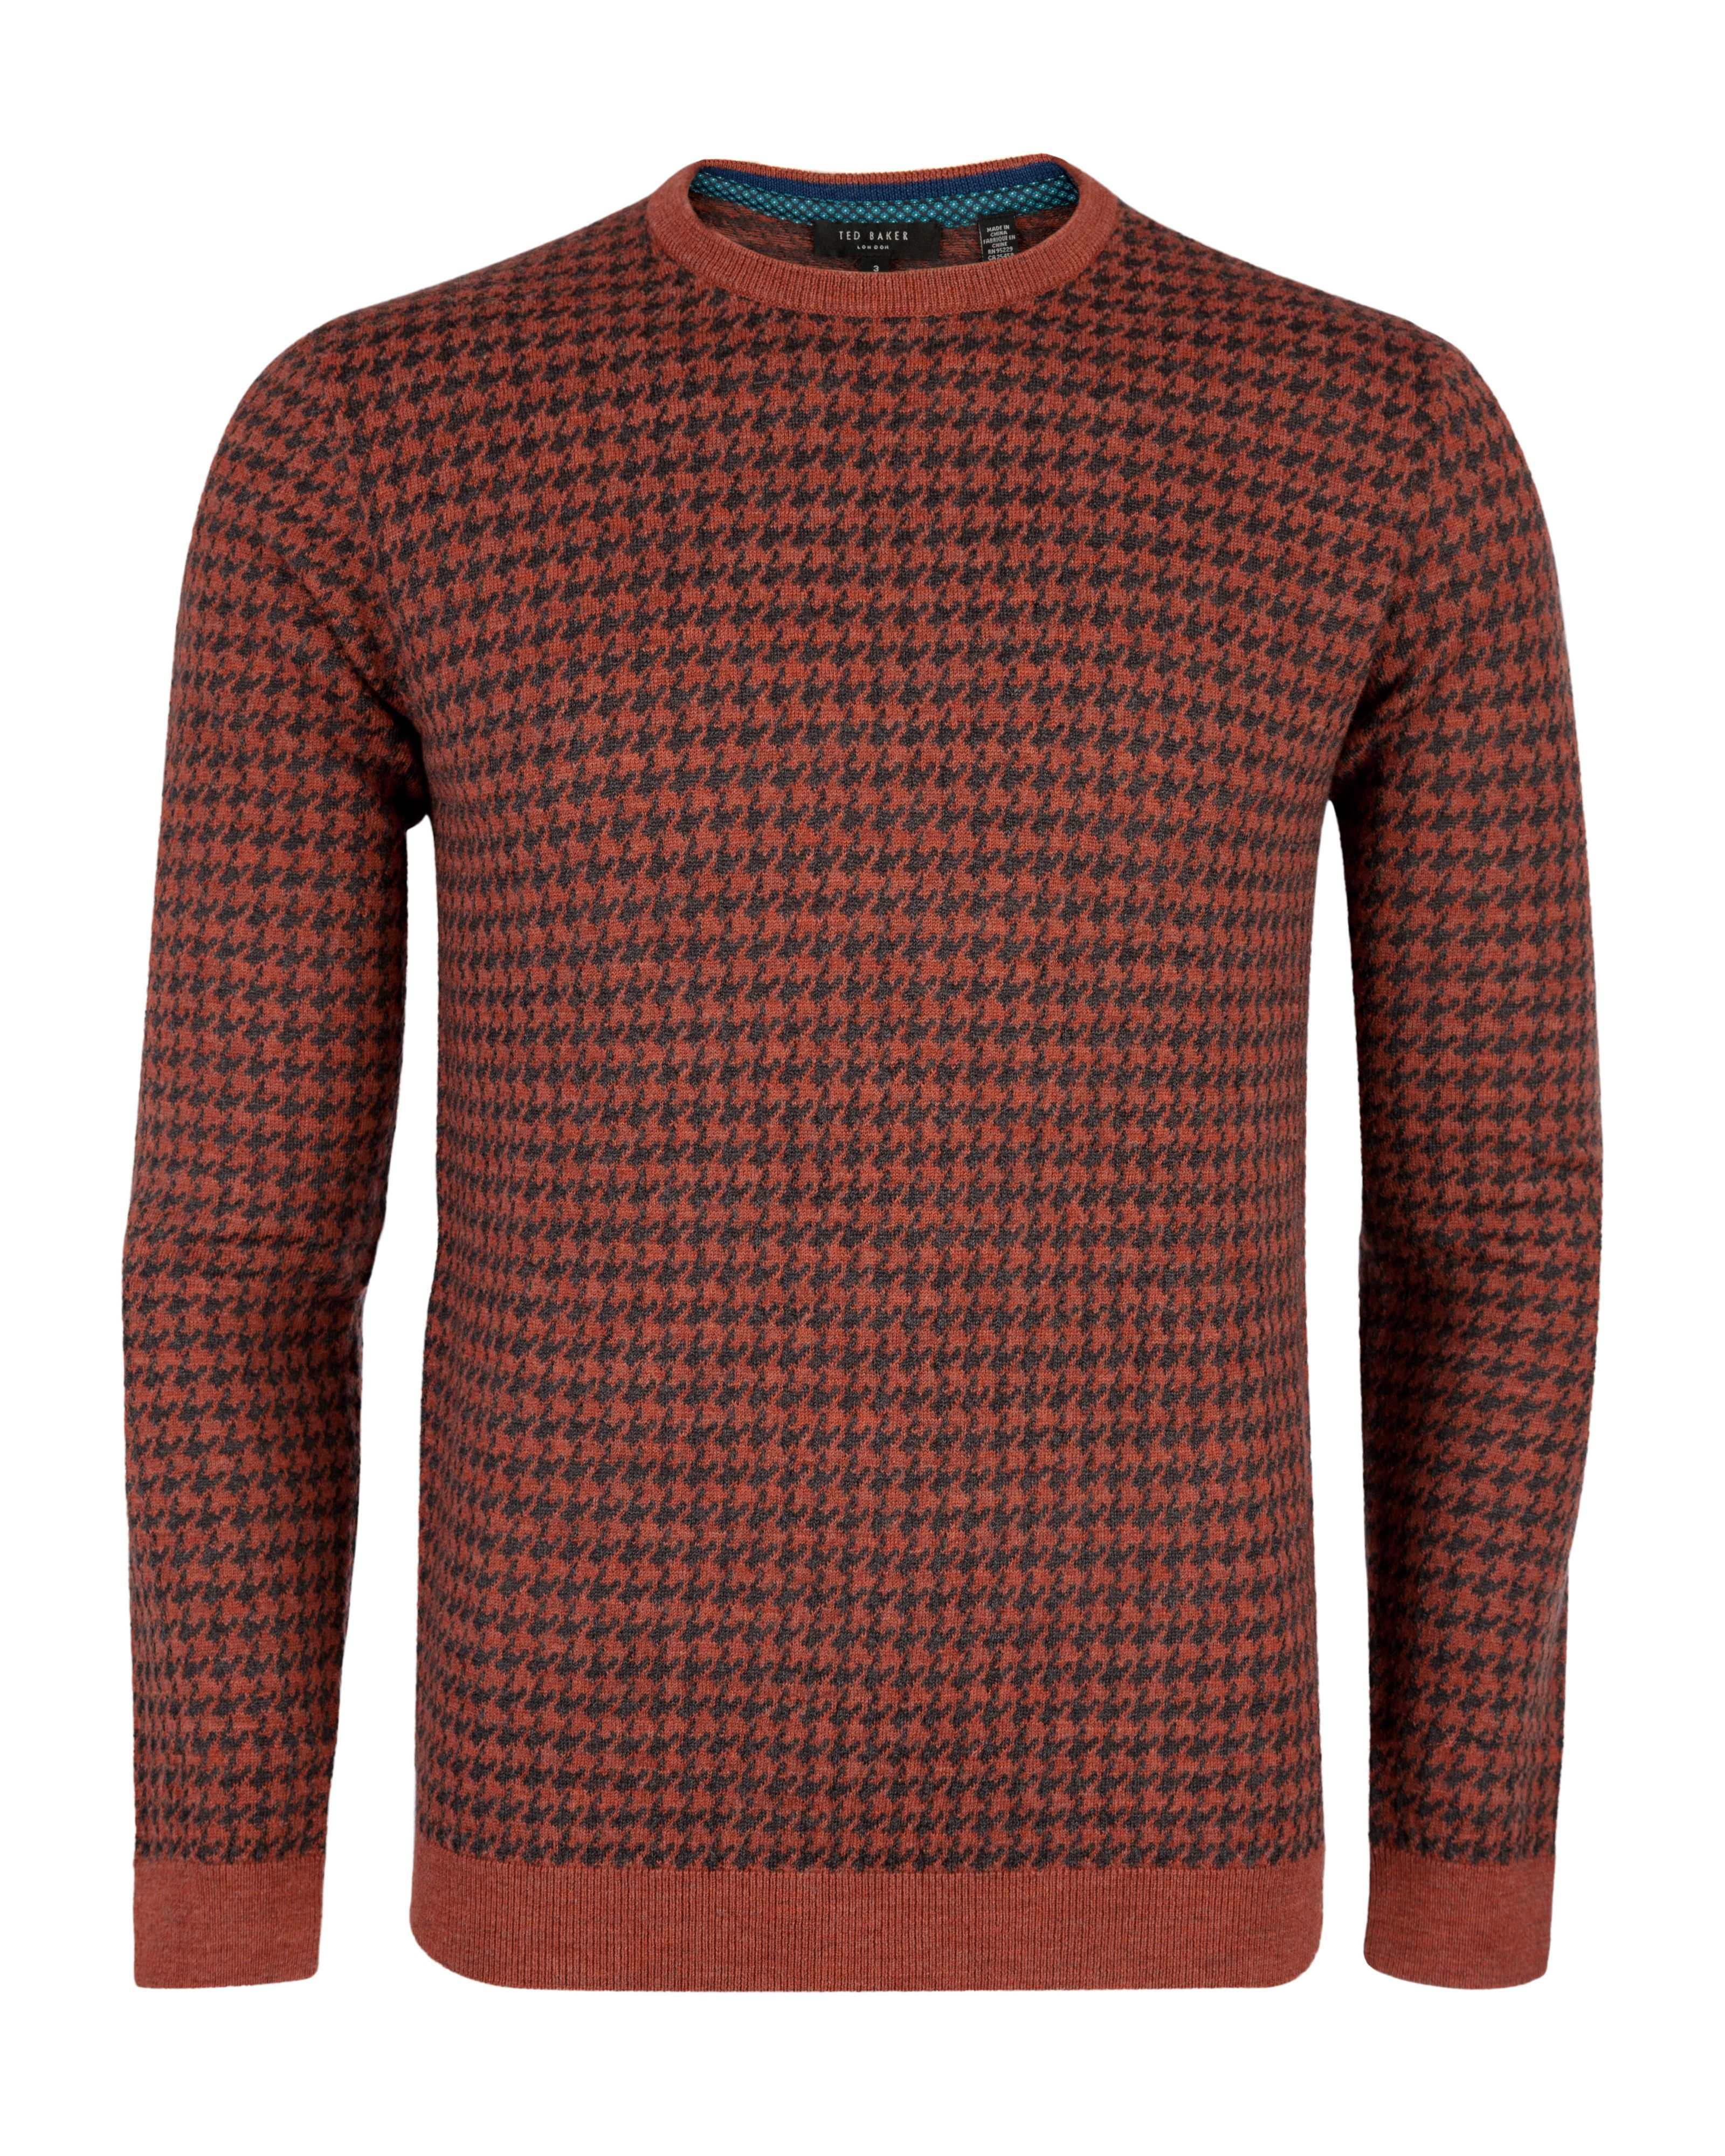 Lyst - Ted Baker Humbie Dogtooth Pattern Jumper in Brown for Men